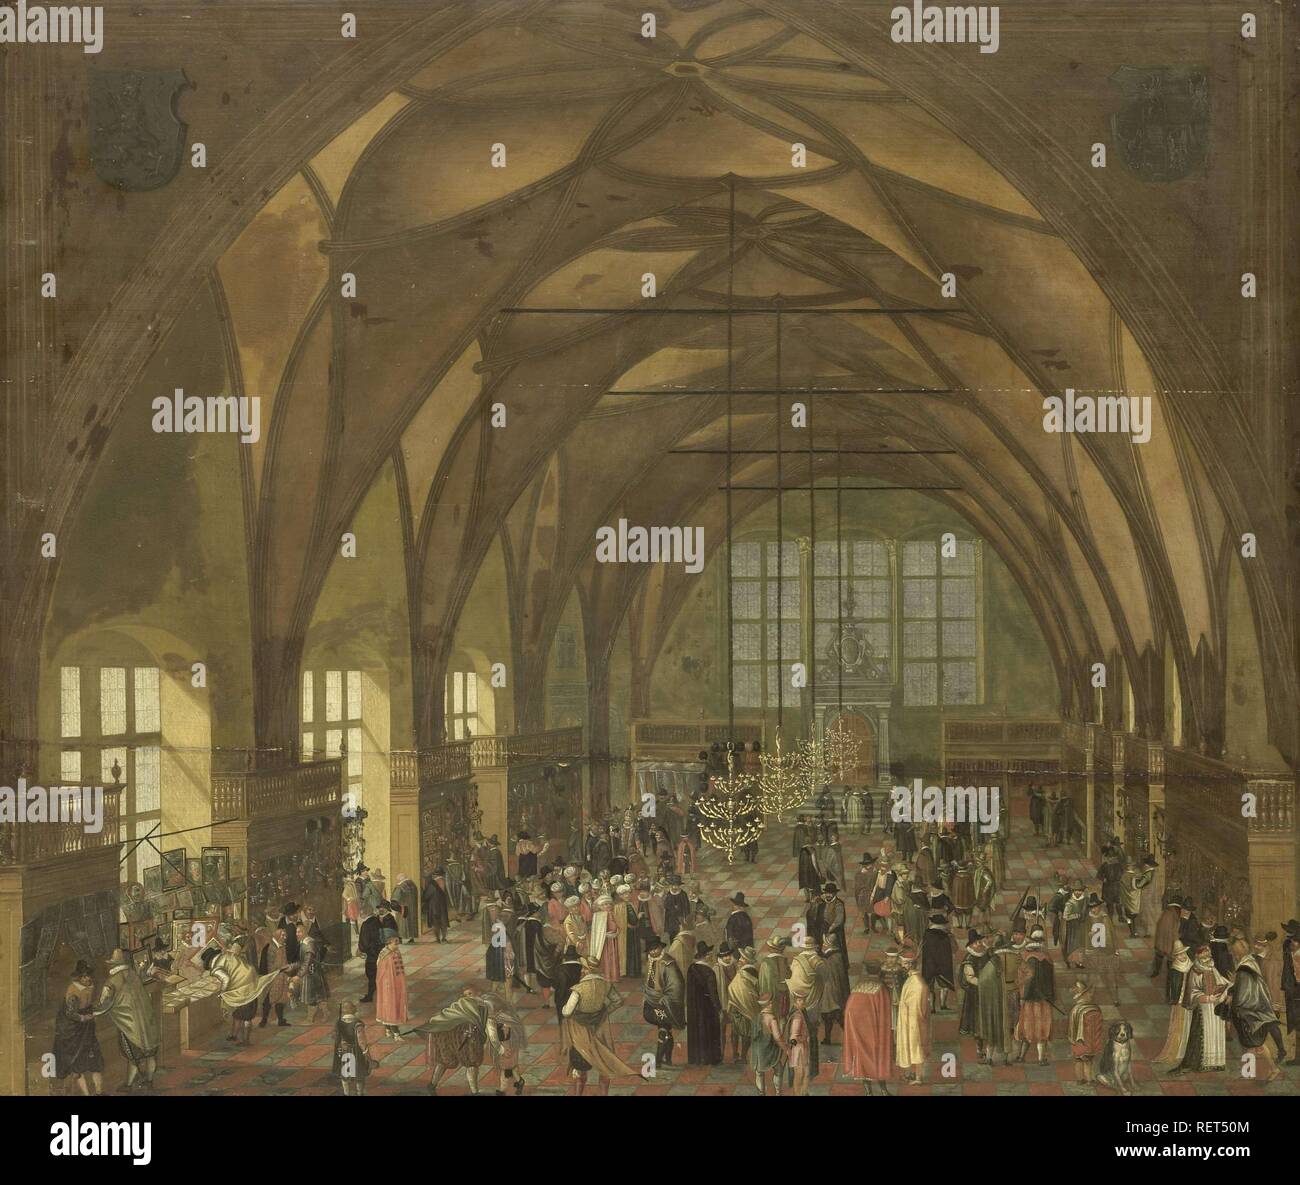 Large Hall in the Prague Hradschin Castle. Painter: anonymous. Painter: Pieter Neefs (I) (rejected attribution). Print maker: Aegidius Sadeler (copy after). Dating: c. 1607 - 1615. Place: Southern Netherlands. Measurements: h 66 cm × w 76.5 cm; d 6.9 cm. Museum: Rijksmuseum, Amsterdam. Stock Photo